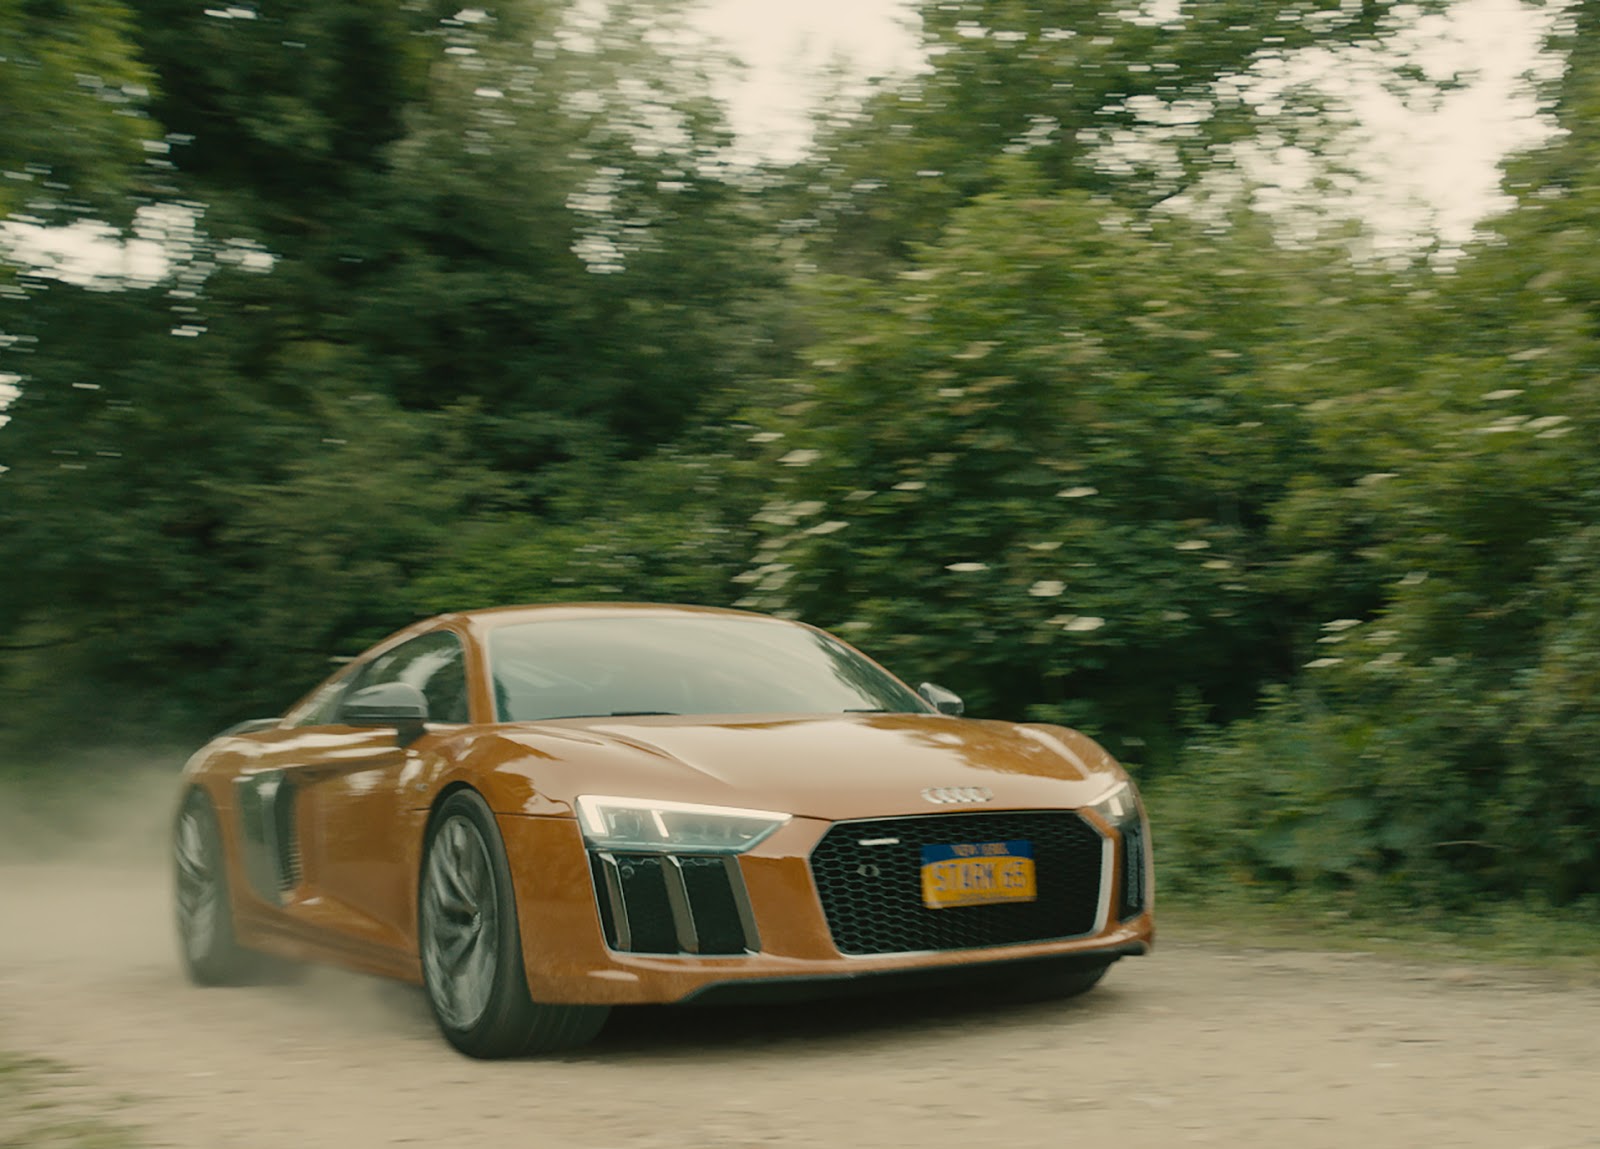 Tony Stark drives the new Audi R8 in Avengers Age of Ultron Απονέμουμε τα Όσκαρ αυτοκινήτου